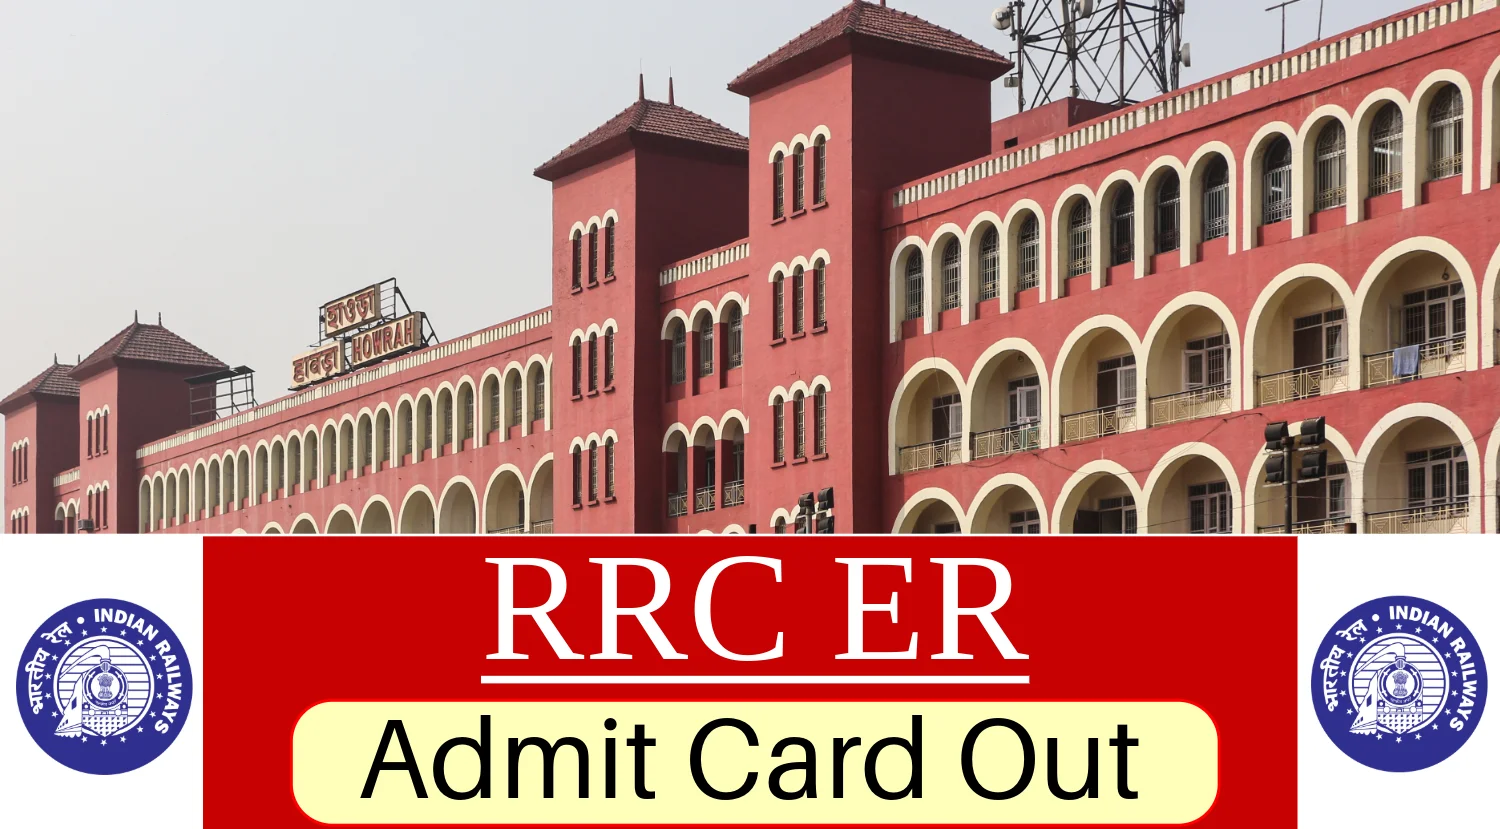 RRC ER Admit Card Out for 3115 Apprentice, Check DV Notification, Date and Download Eastern Railway Apprentice Admit Card Now